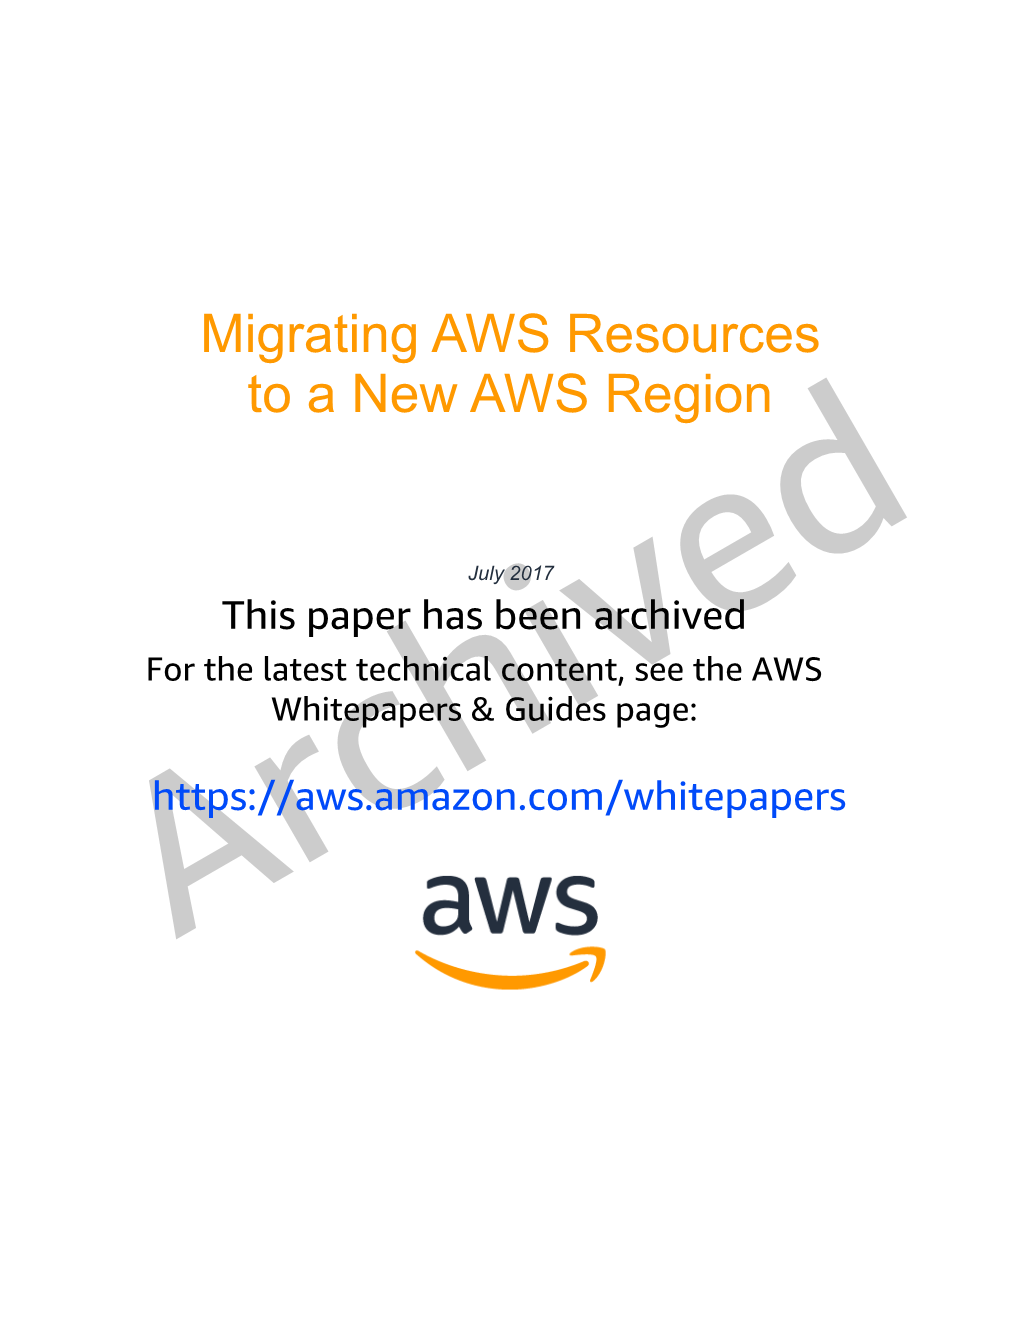 Migrating AWS Resources to a New Region